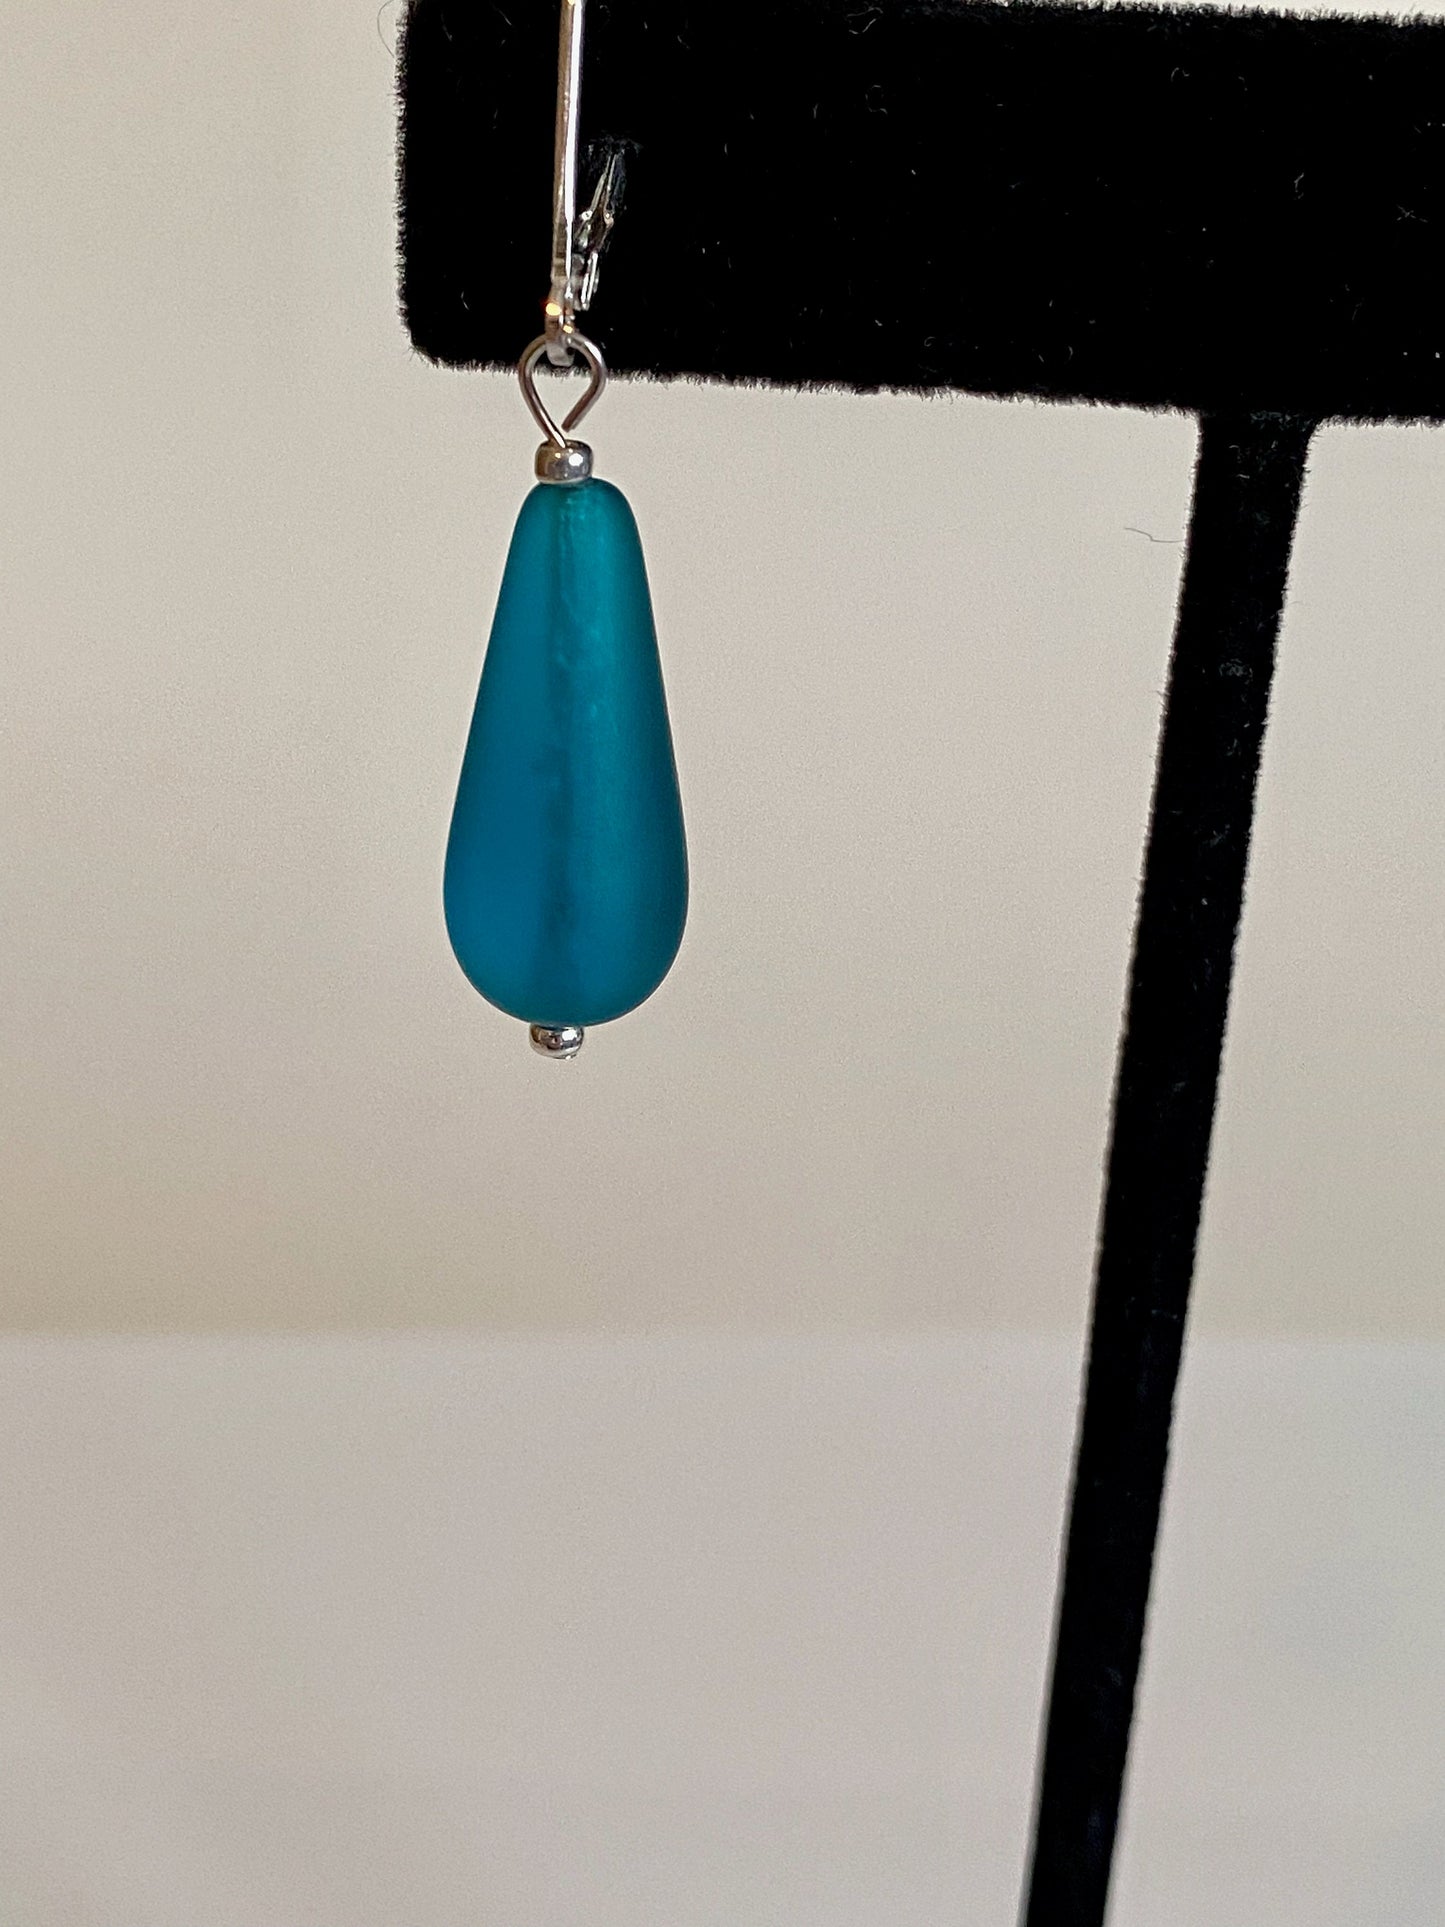 Soft sea glass type frosted teal color teardrop earrings. Fashioned with a quality sterling silver lever back clasp.